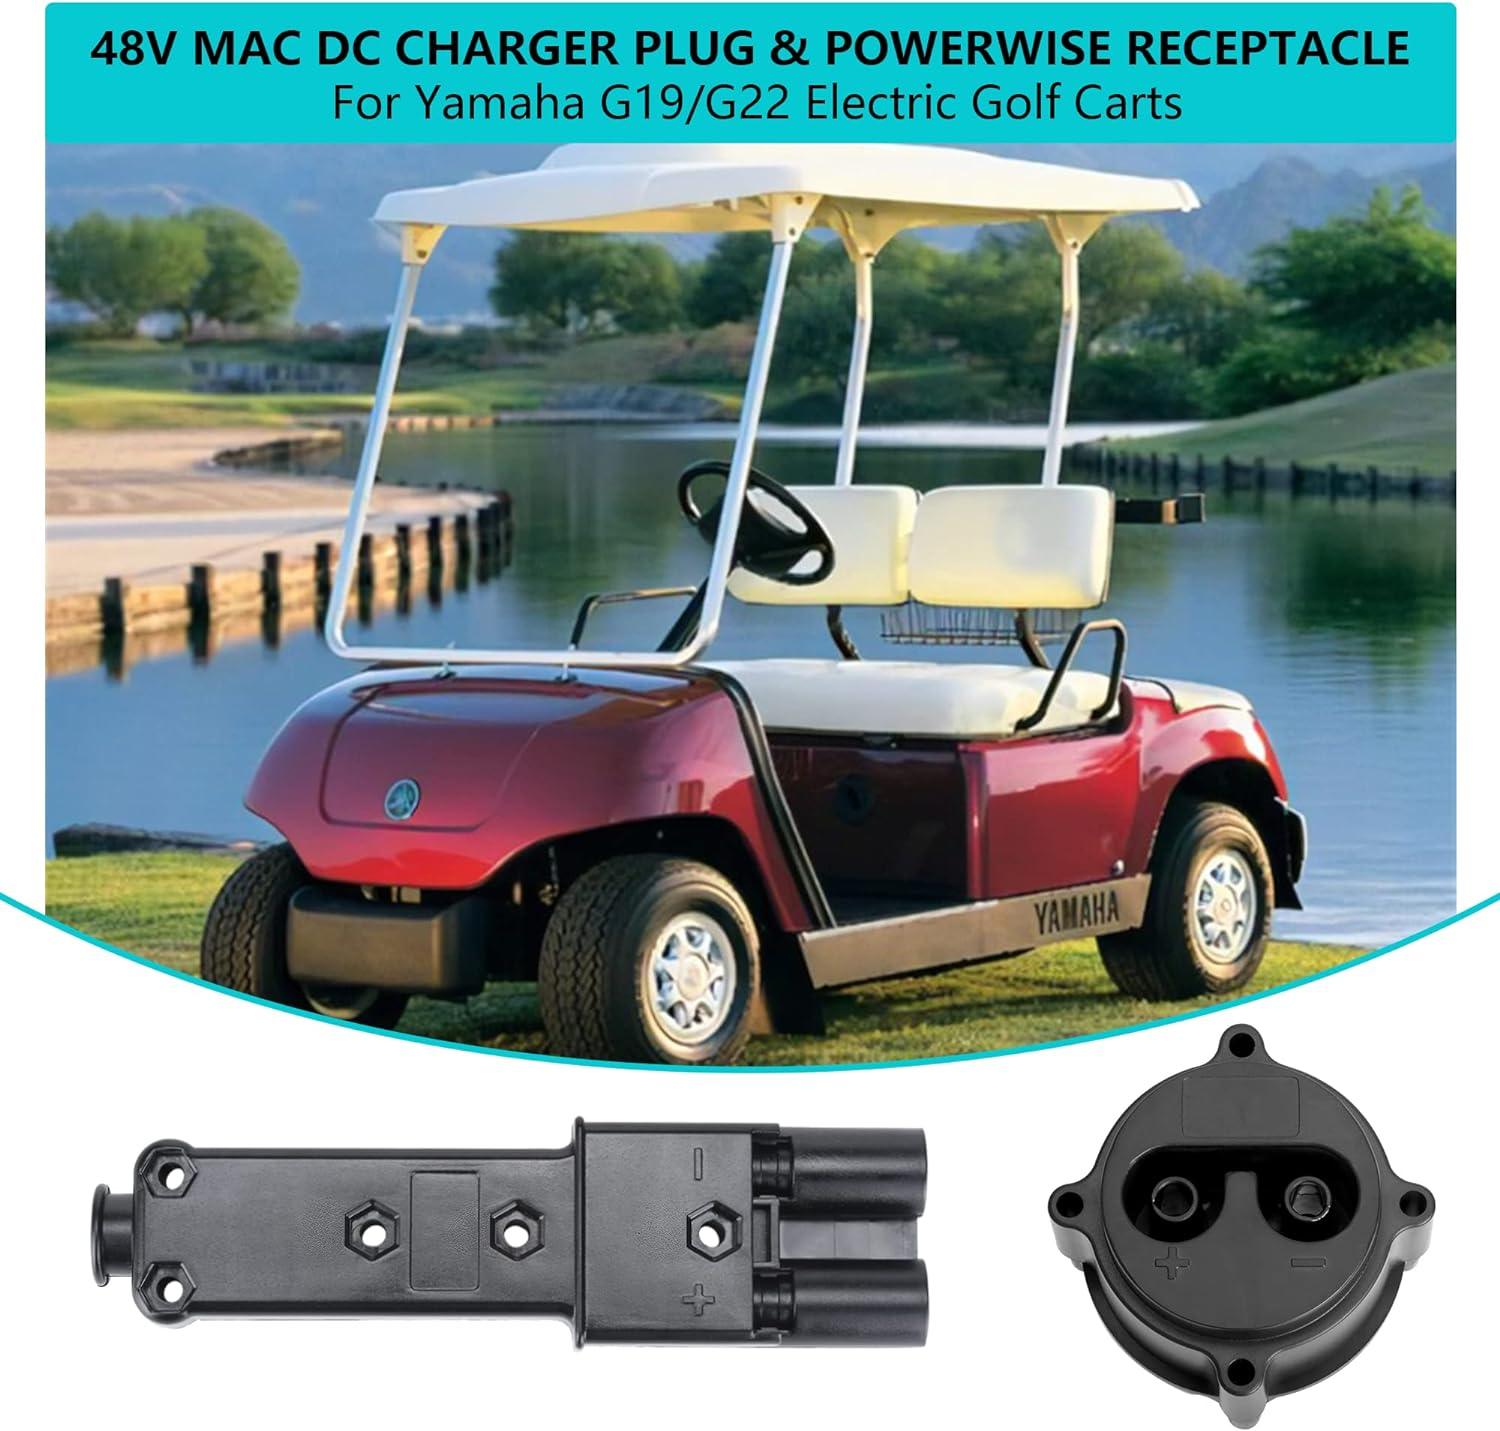 Golf Cart Charger Plug Powerwise Receptacle Kit for Yamaha G19 G22 - 10L0L Kryptex Golf Carts